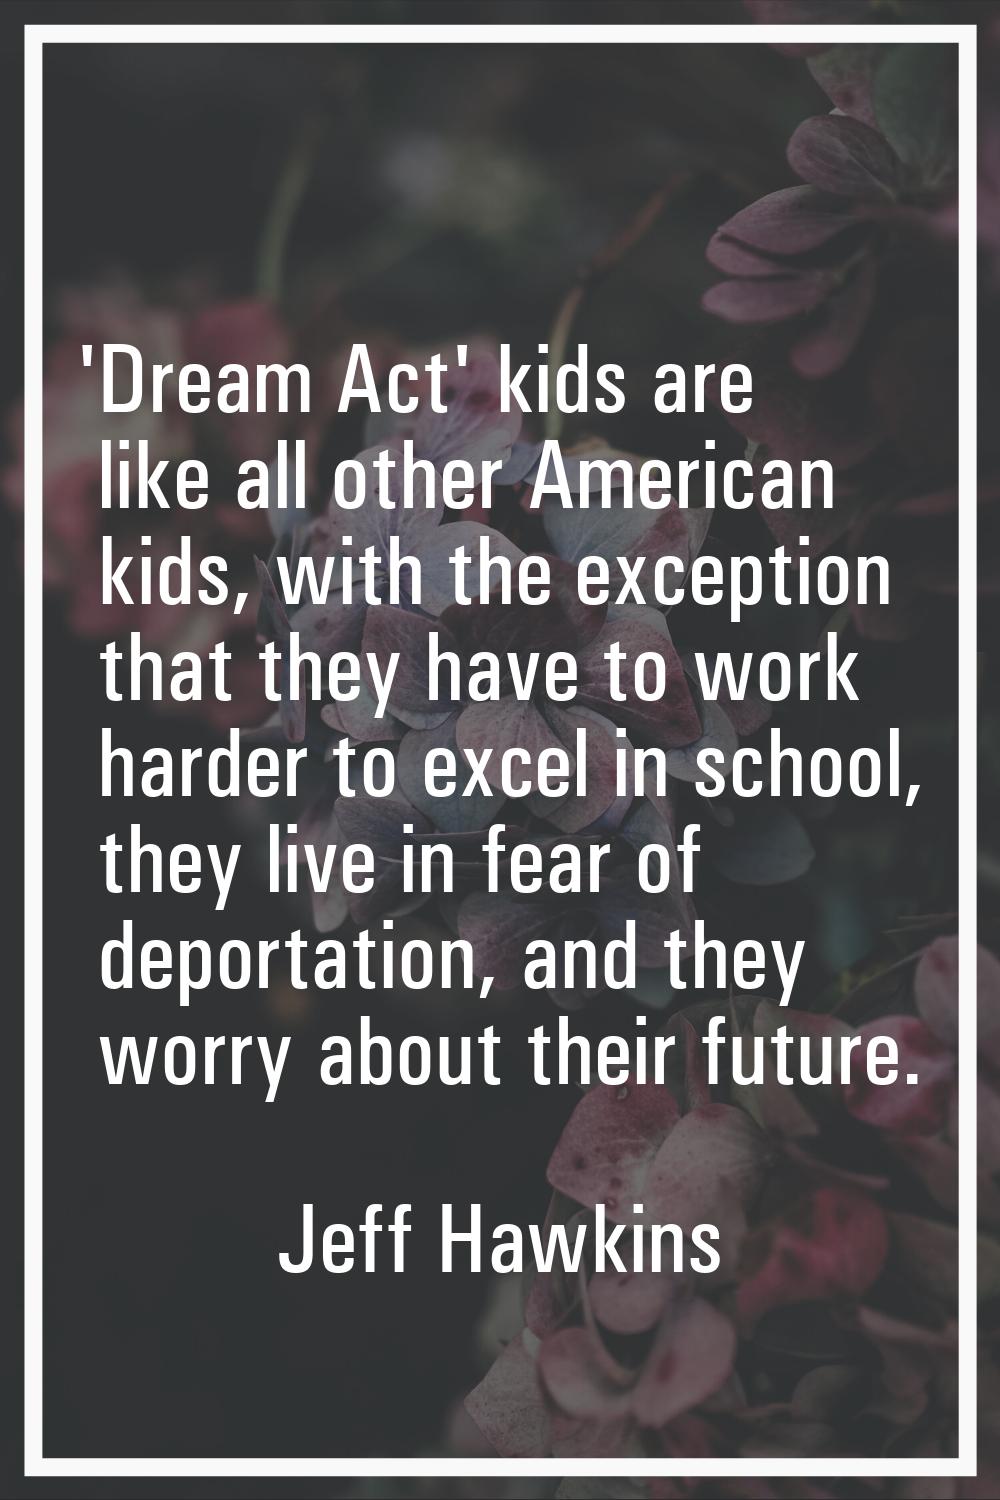 'Dream Act' kids are like all other American kids, with the exception that they have to work harder